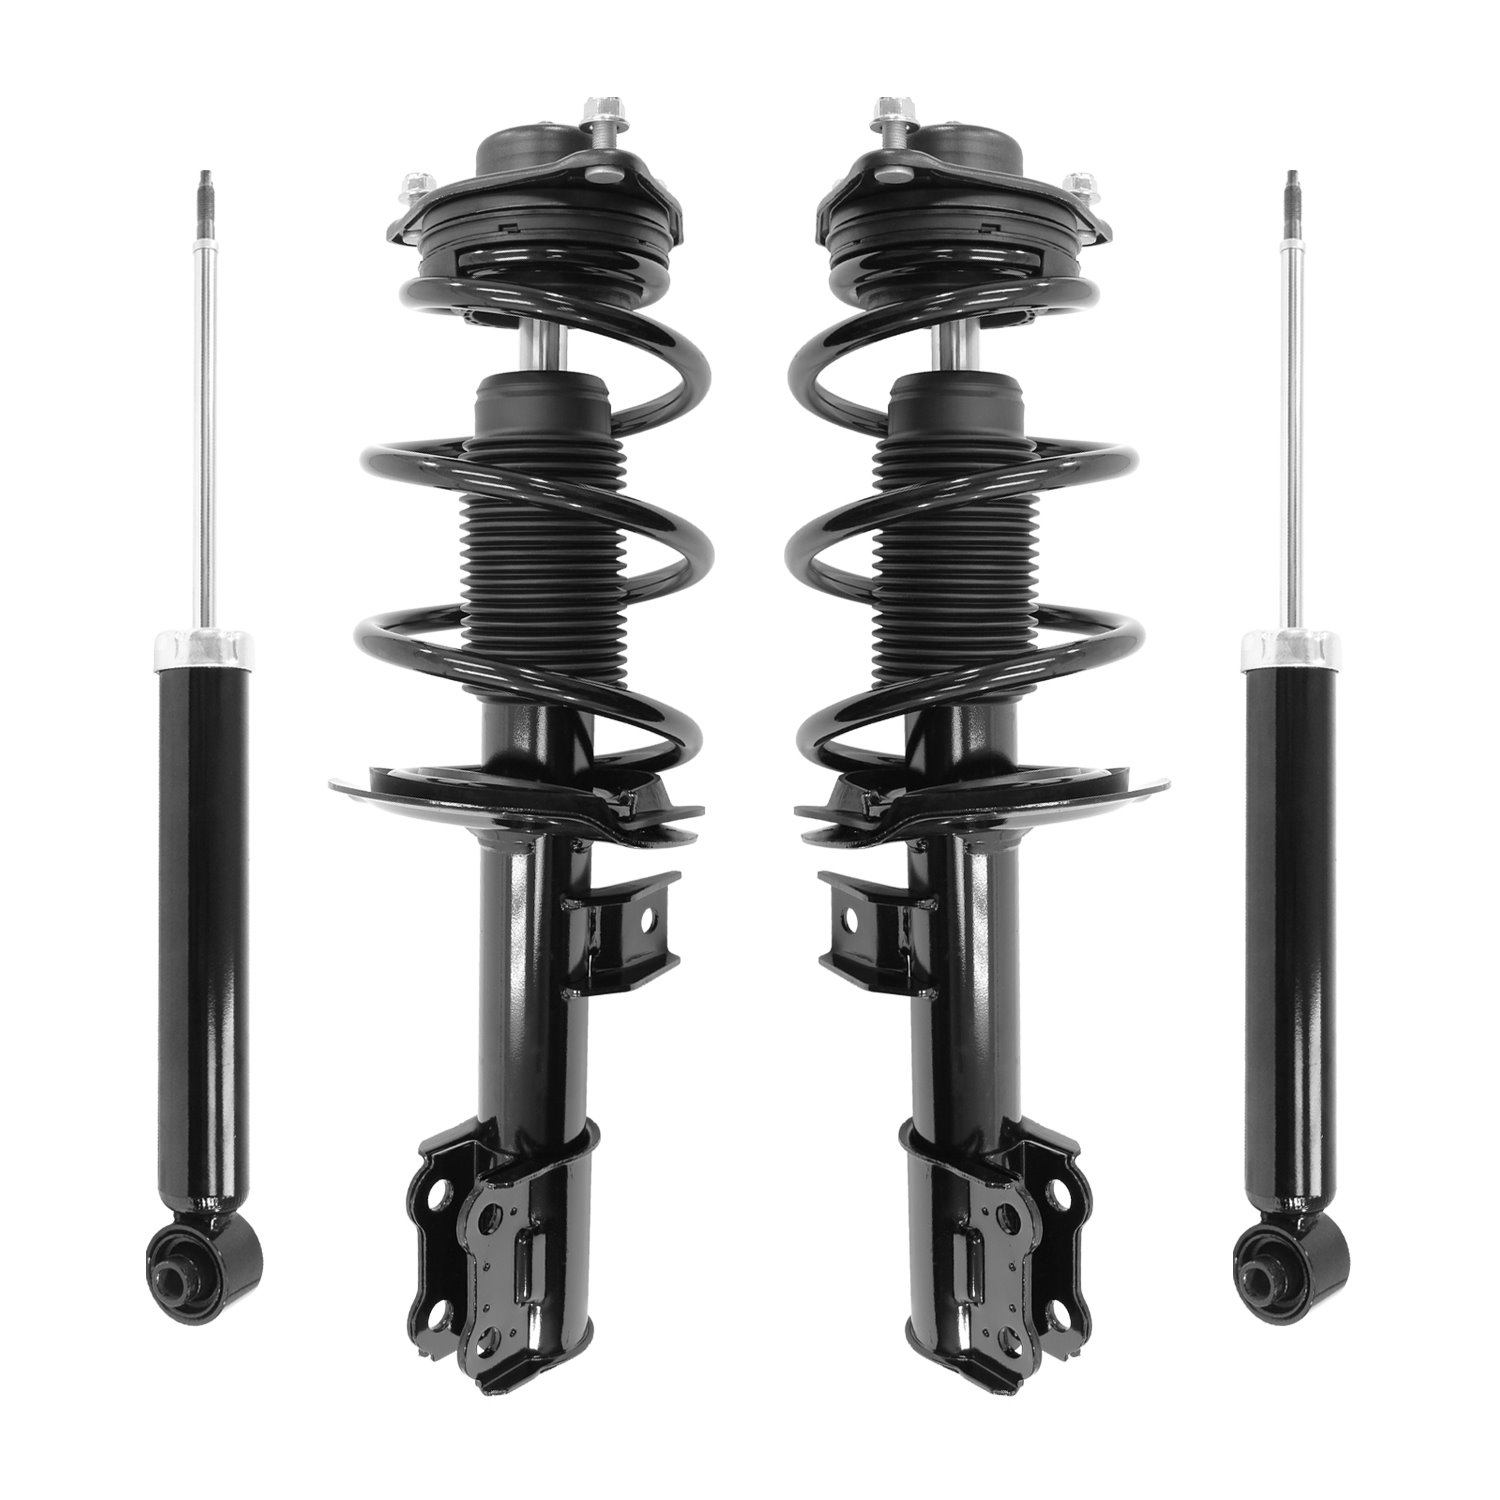 4-11167-259950-001 Front & Rear Complete Strut Assembly Shock Absorber Kit Fits Select Hyundai Genesis Coupe